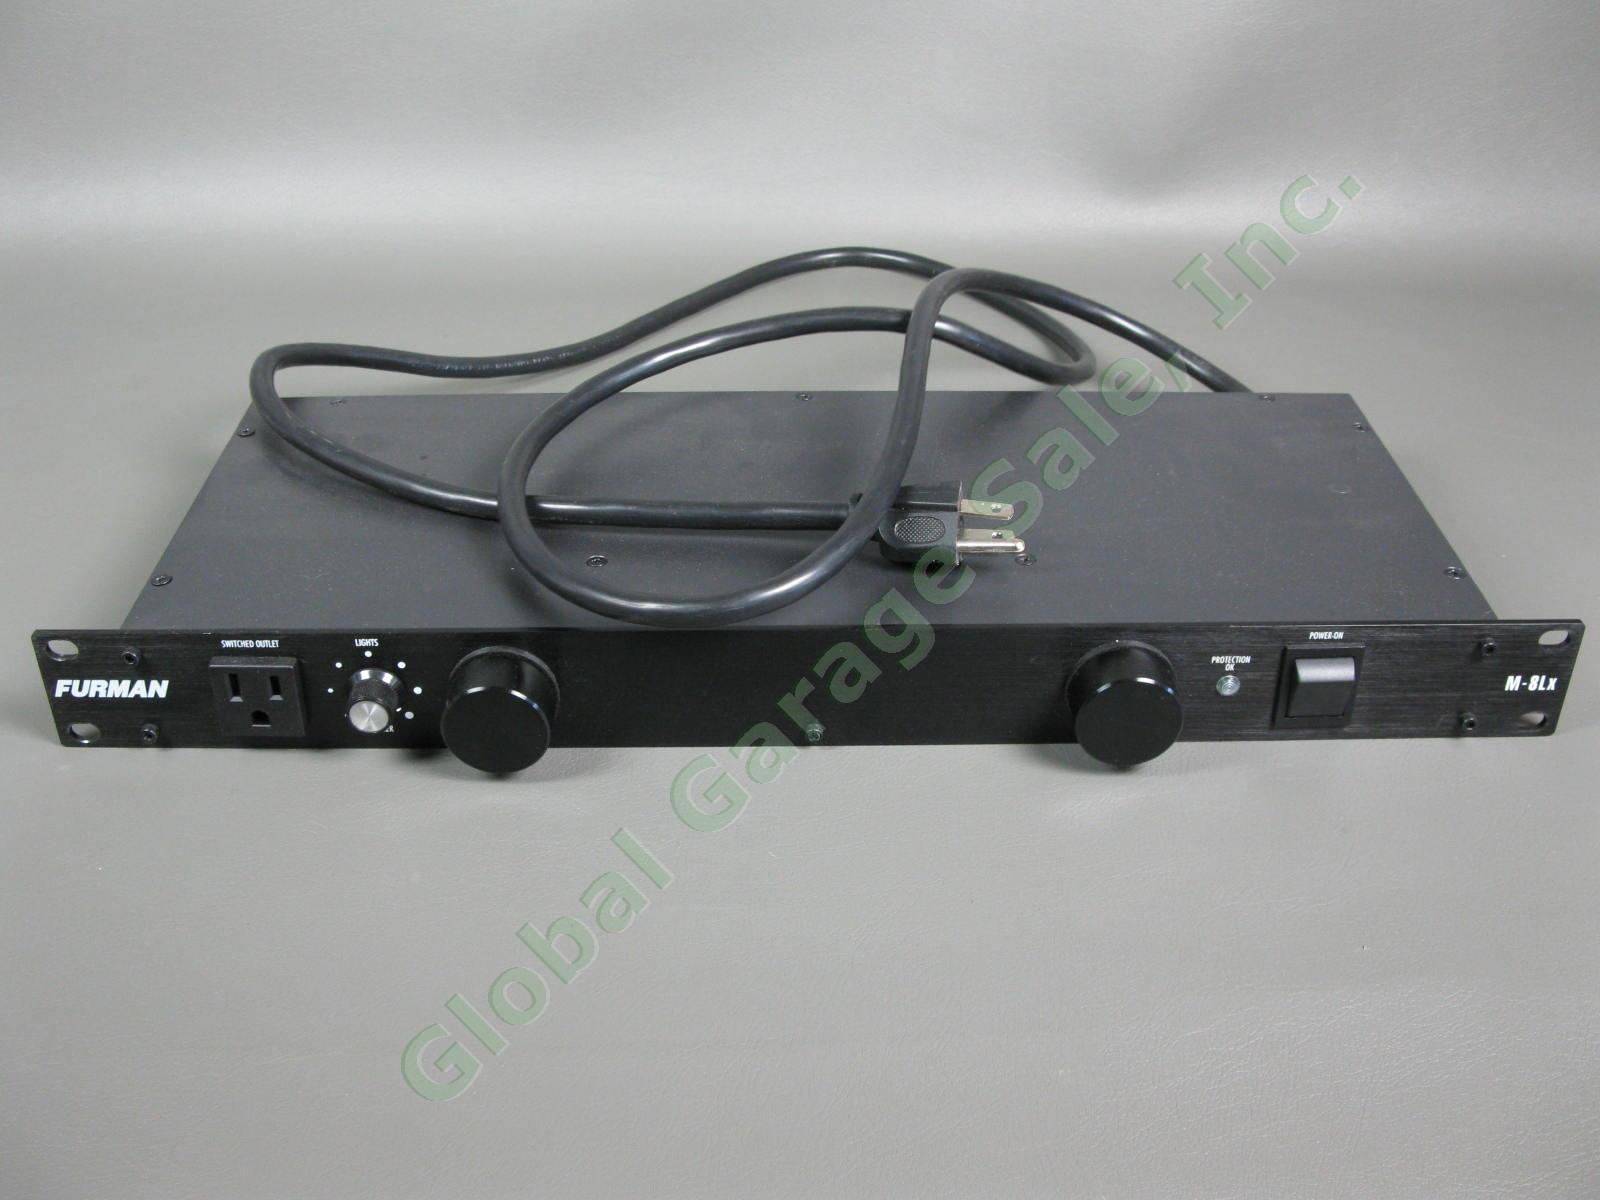 Furman Merit M-8Lx 15A AC Standard Power Conditioner 9 Outlet Rack Mount System